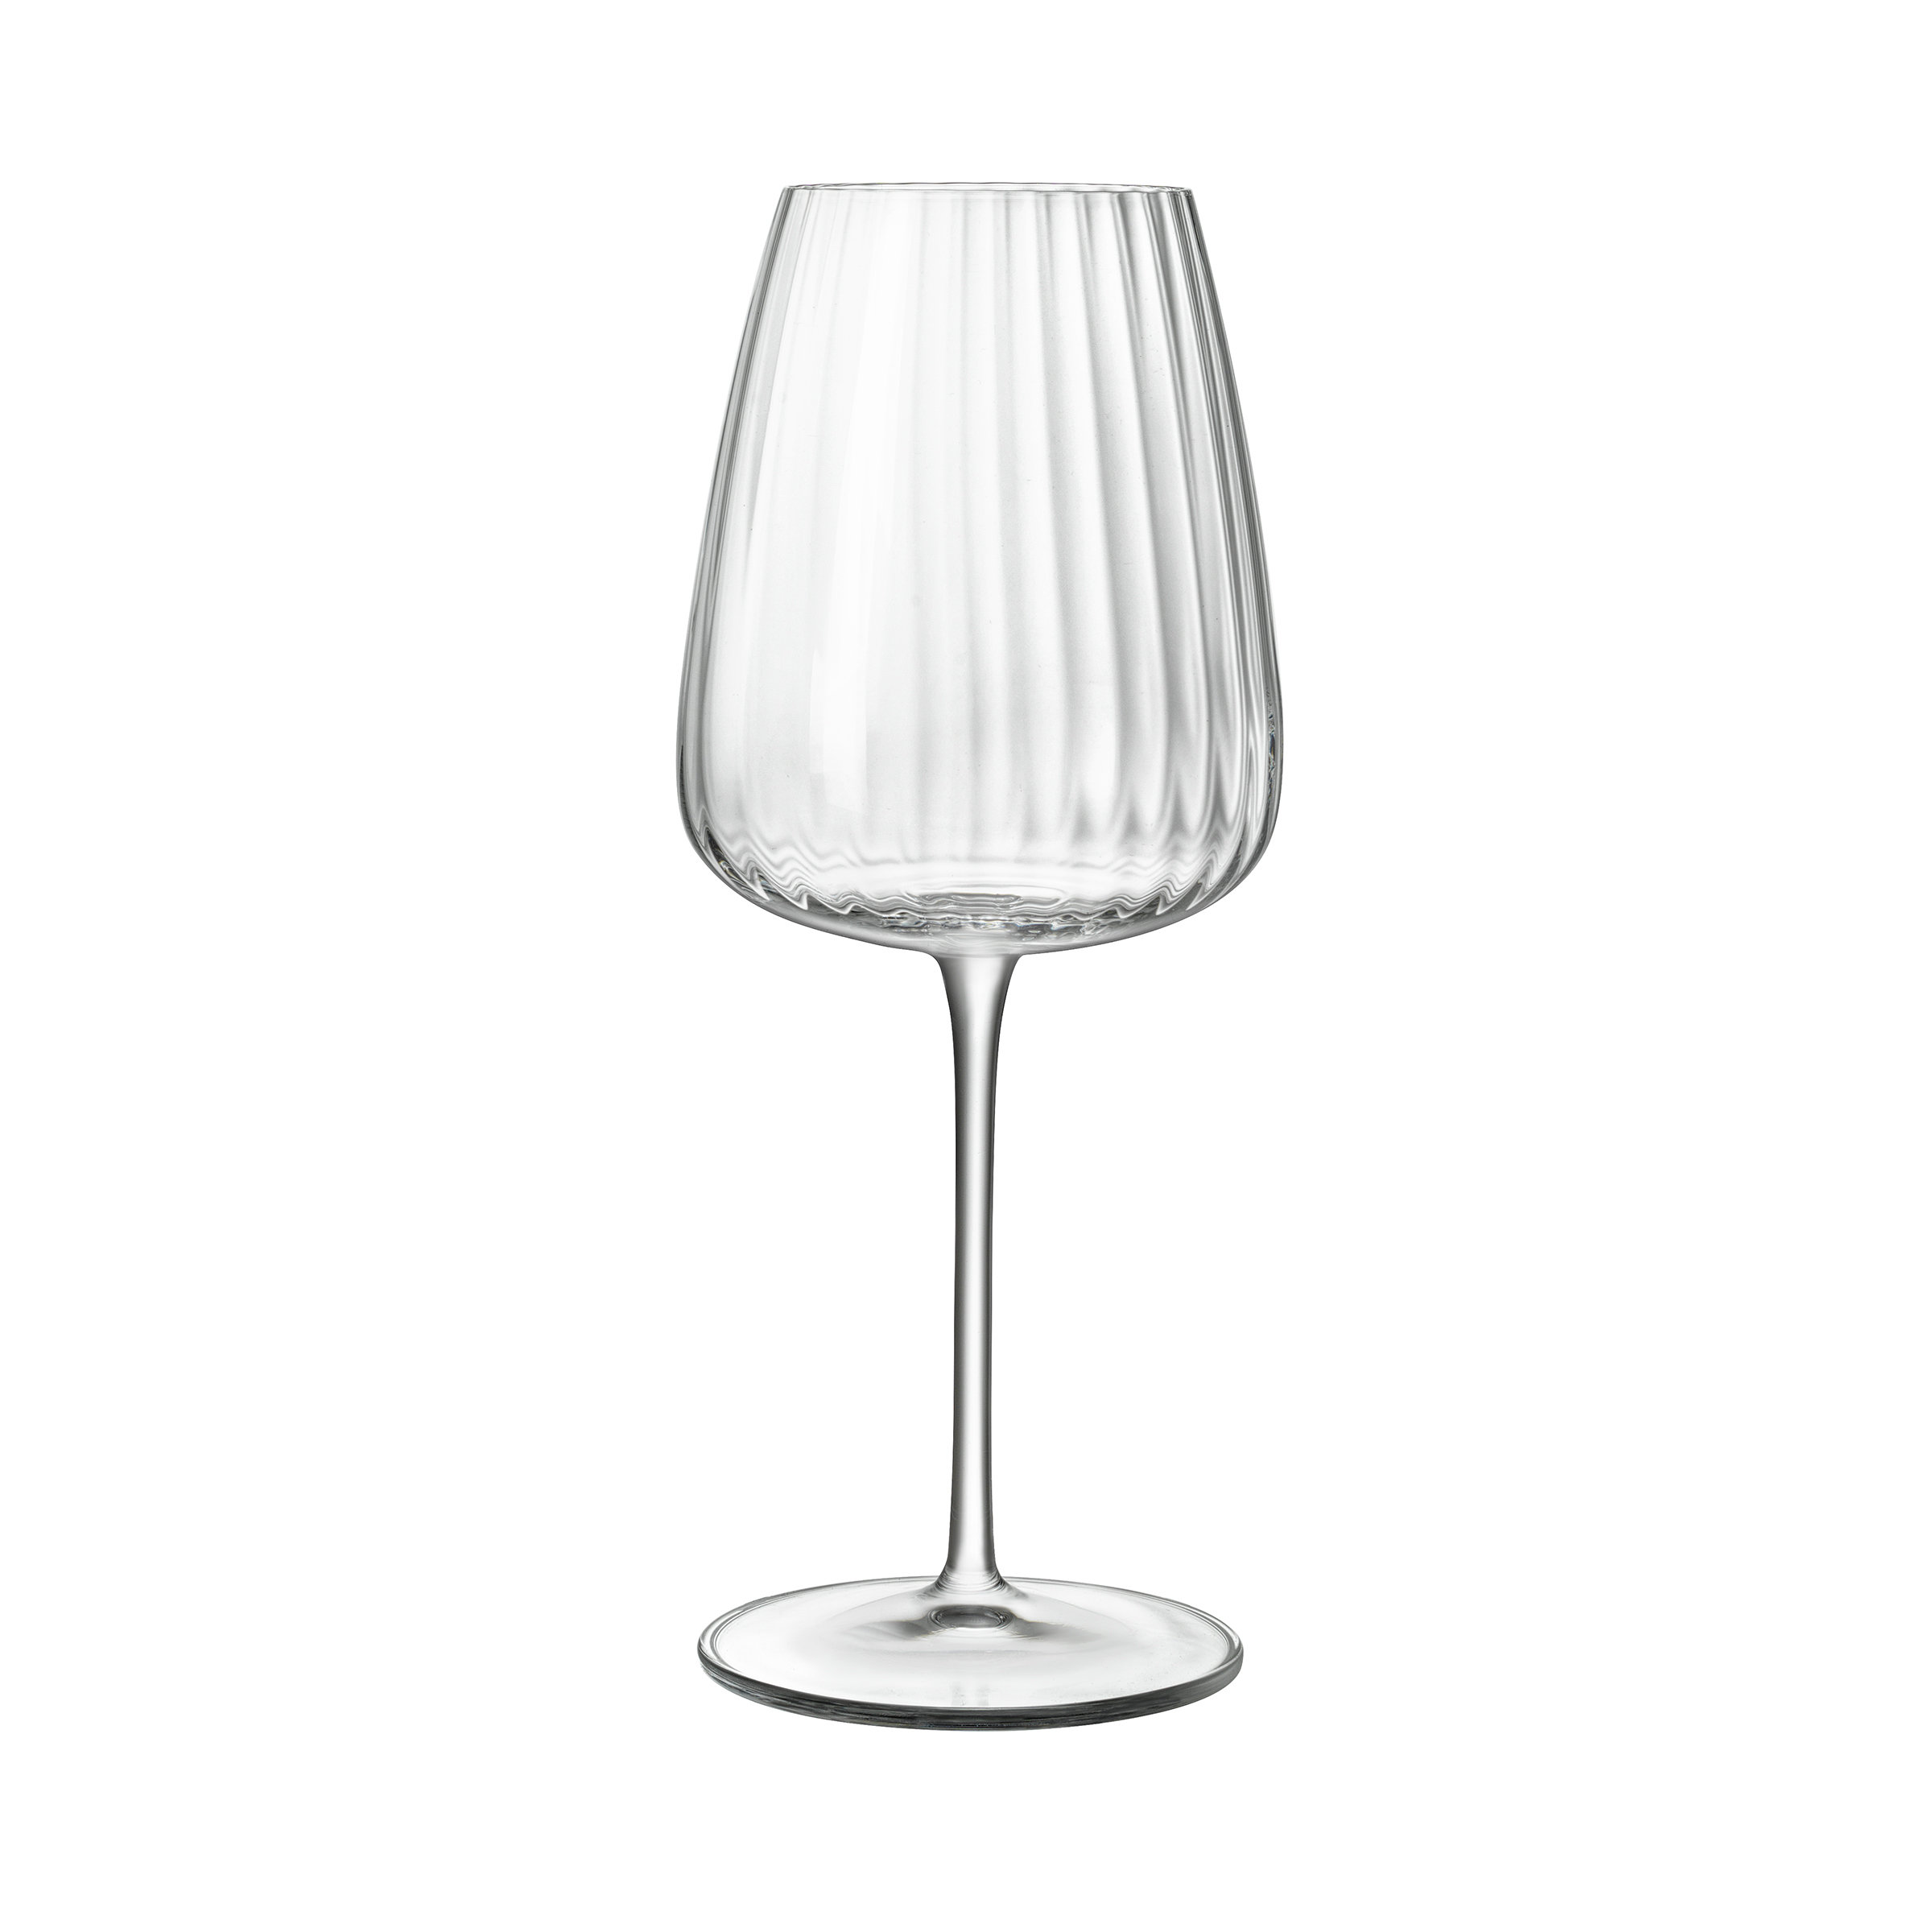 Libbey Paneled All Purpose Wine Glasses, 13.5-Ounce, Set of 4